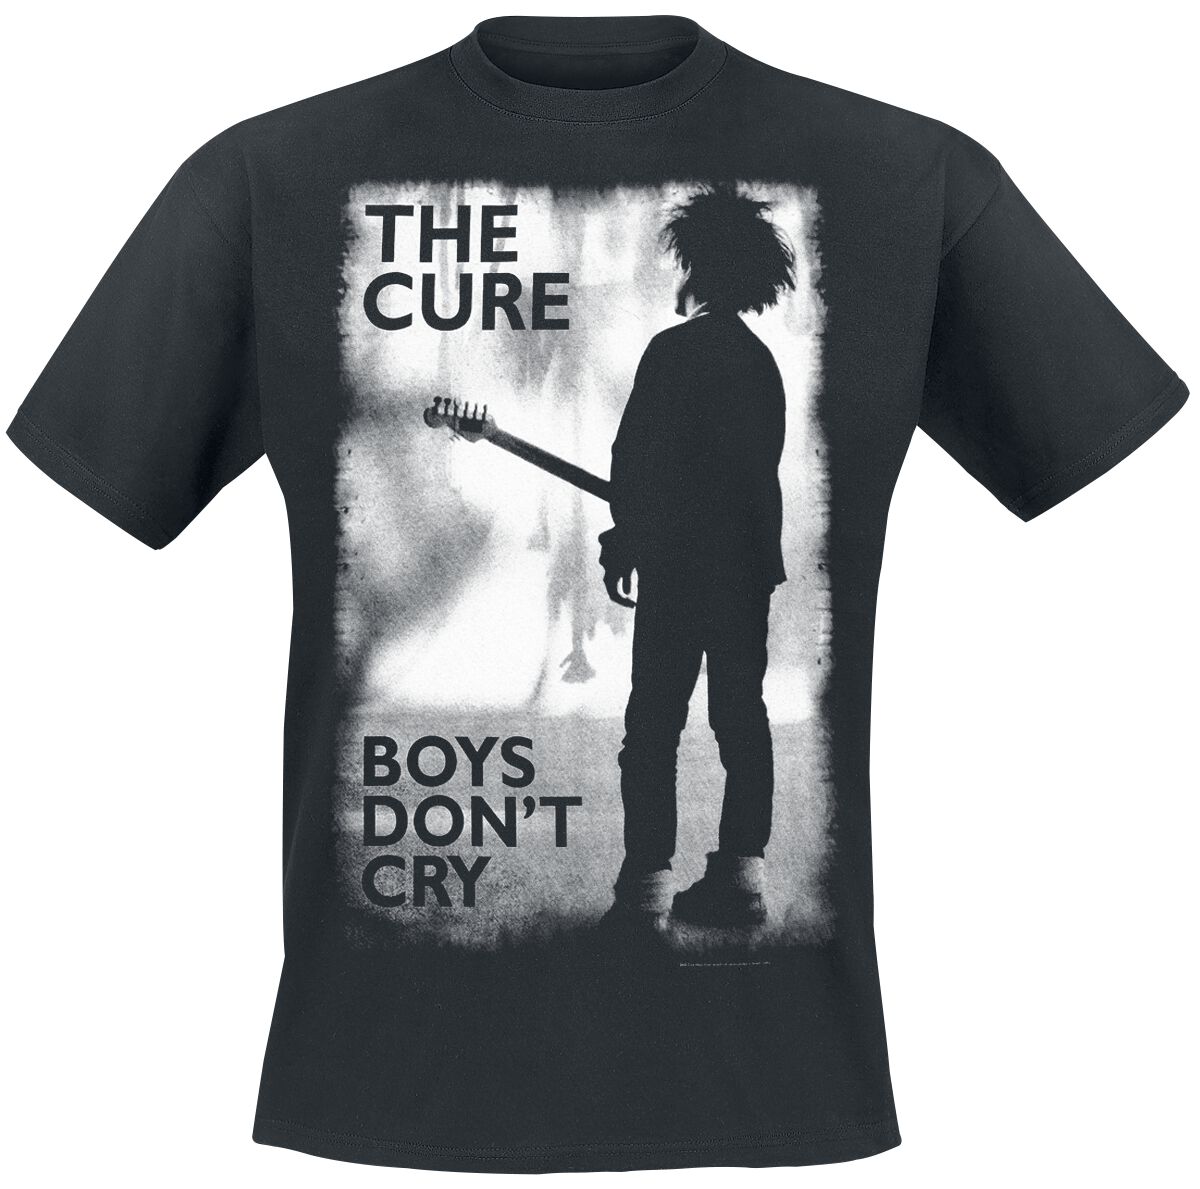 Boys Don't Cry, The Cure T-Shirt